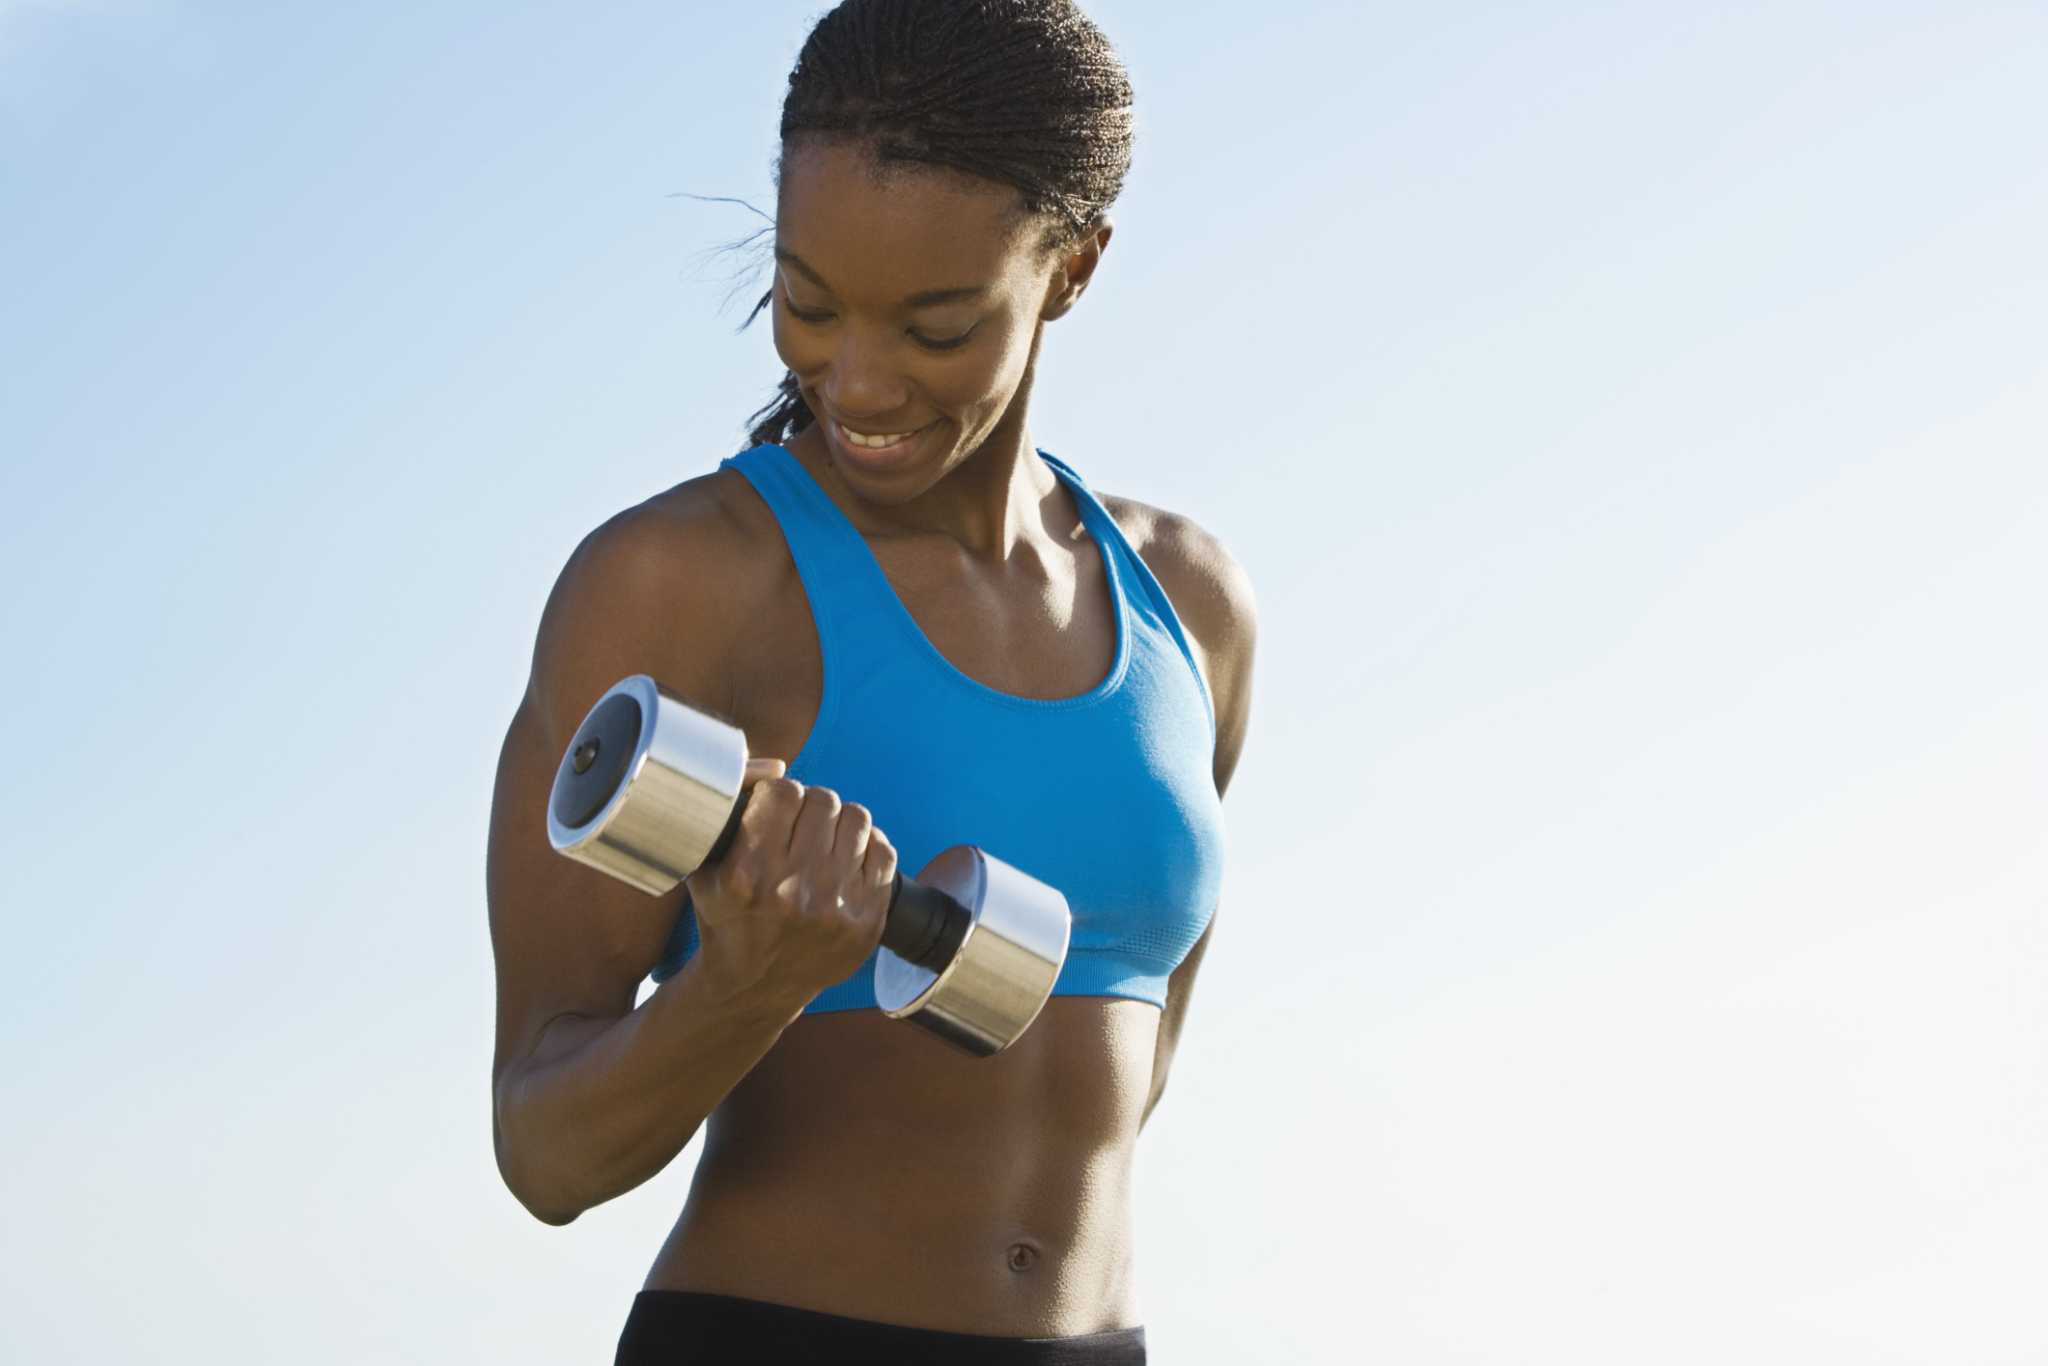 Slimmer Arms Workout With 5lb. Dumbbells